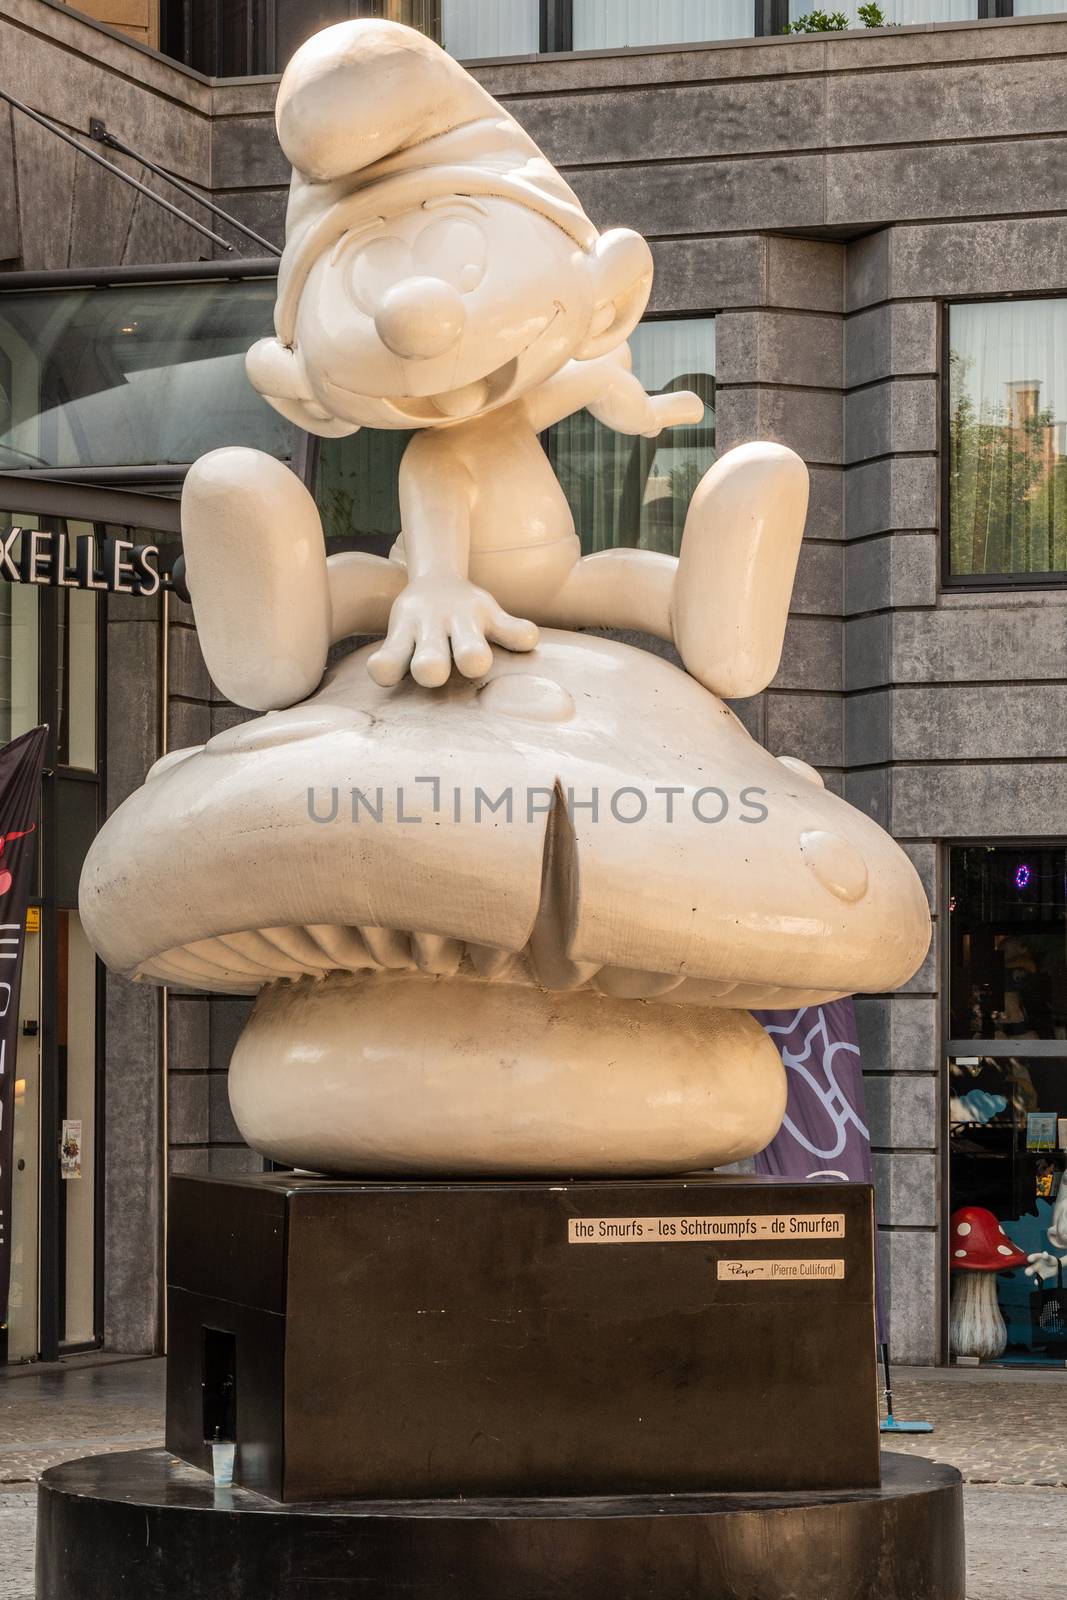 Brussels, Belgium - June 22, 2019: Large white statue of one Smurf on black pedestal in front of MOOF museum.